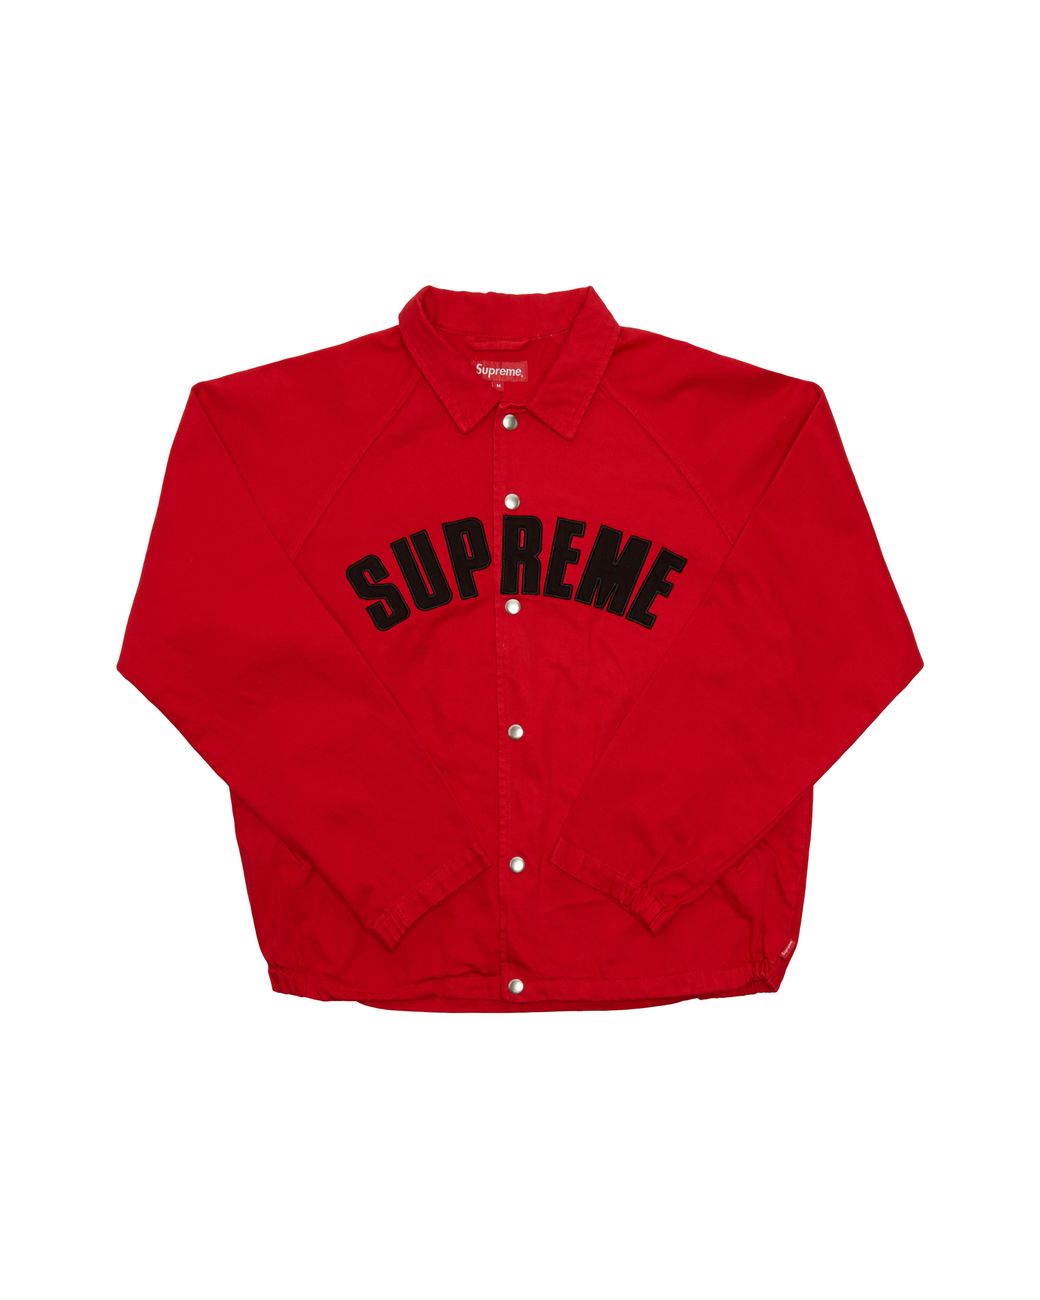 Supreme Snap Front Twill Jacket in Red for Men - Lyst